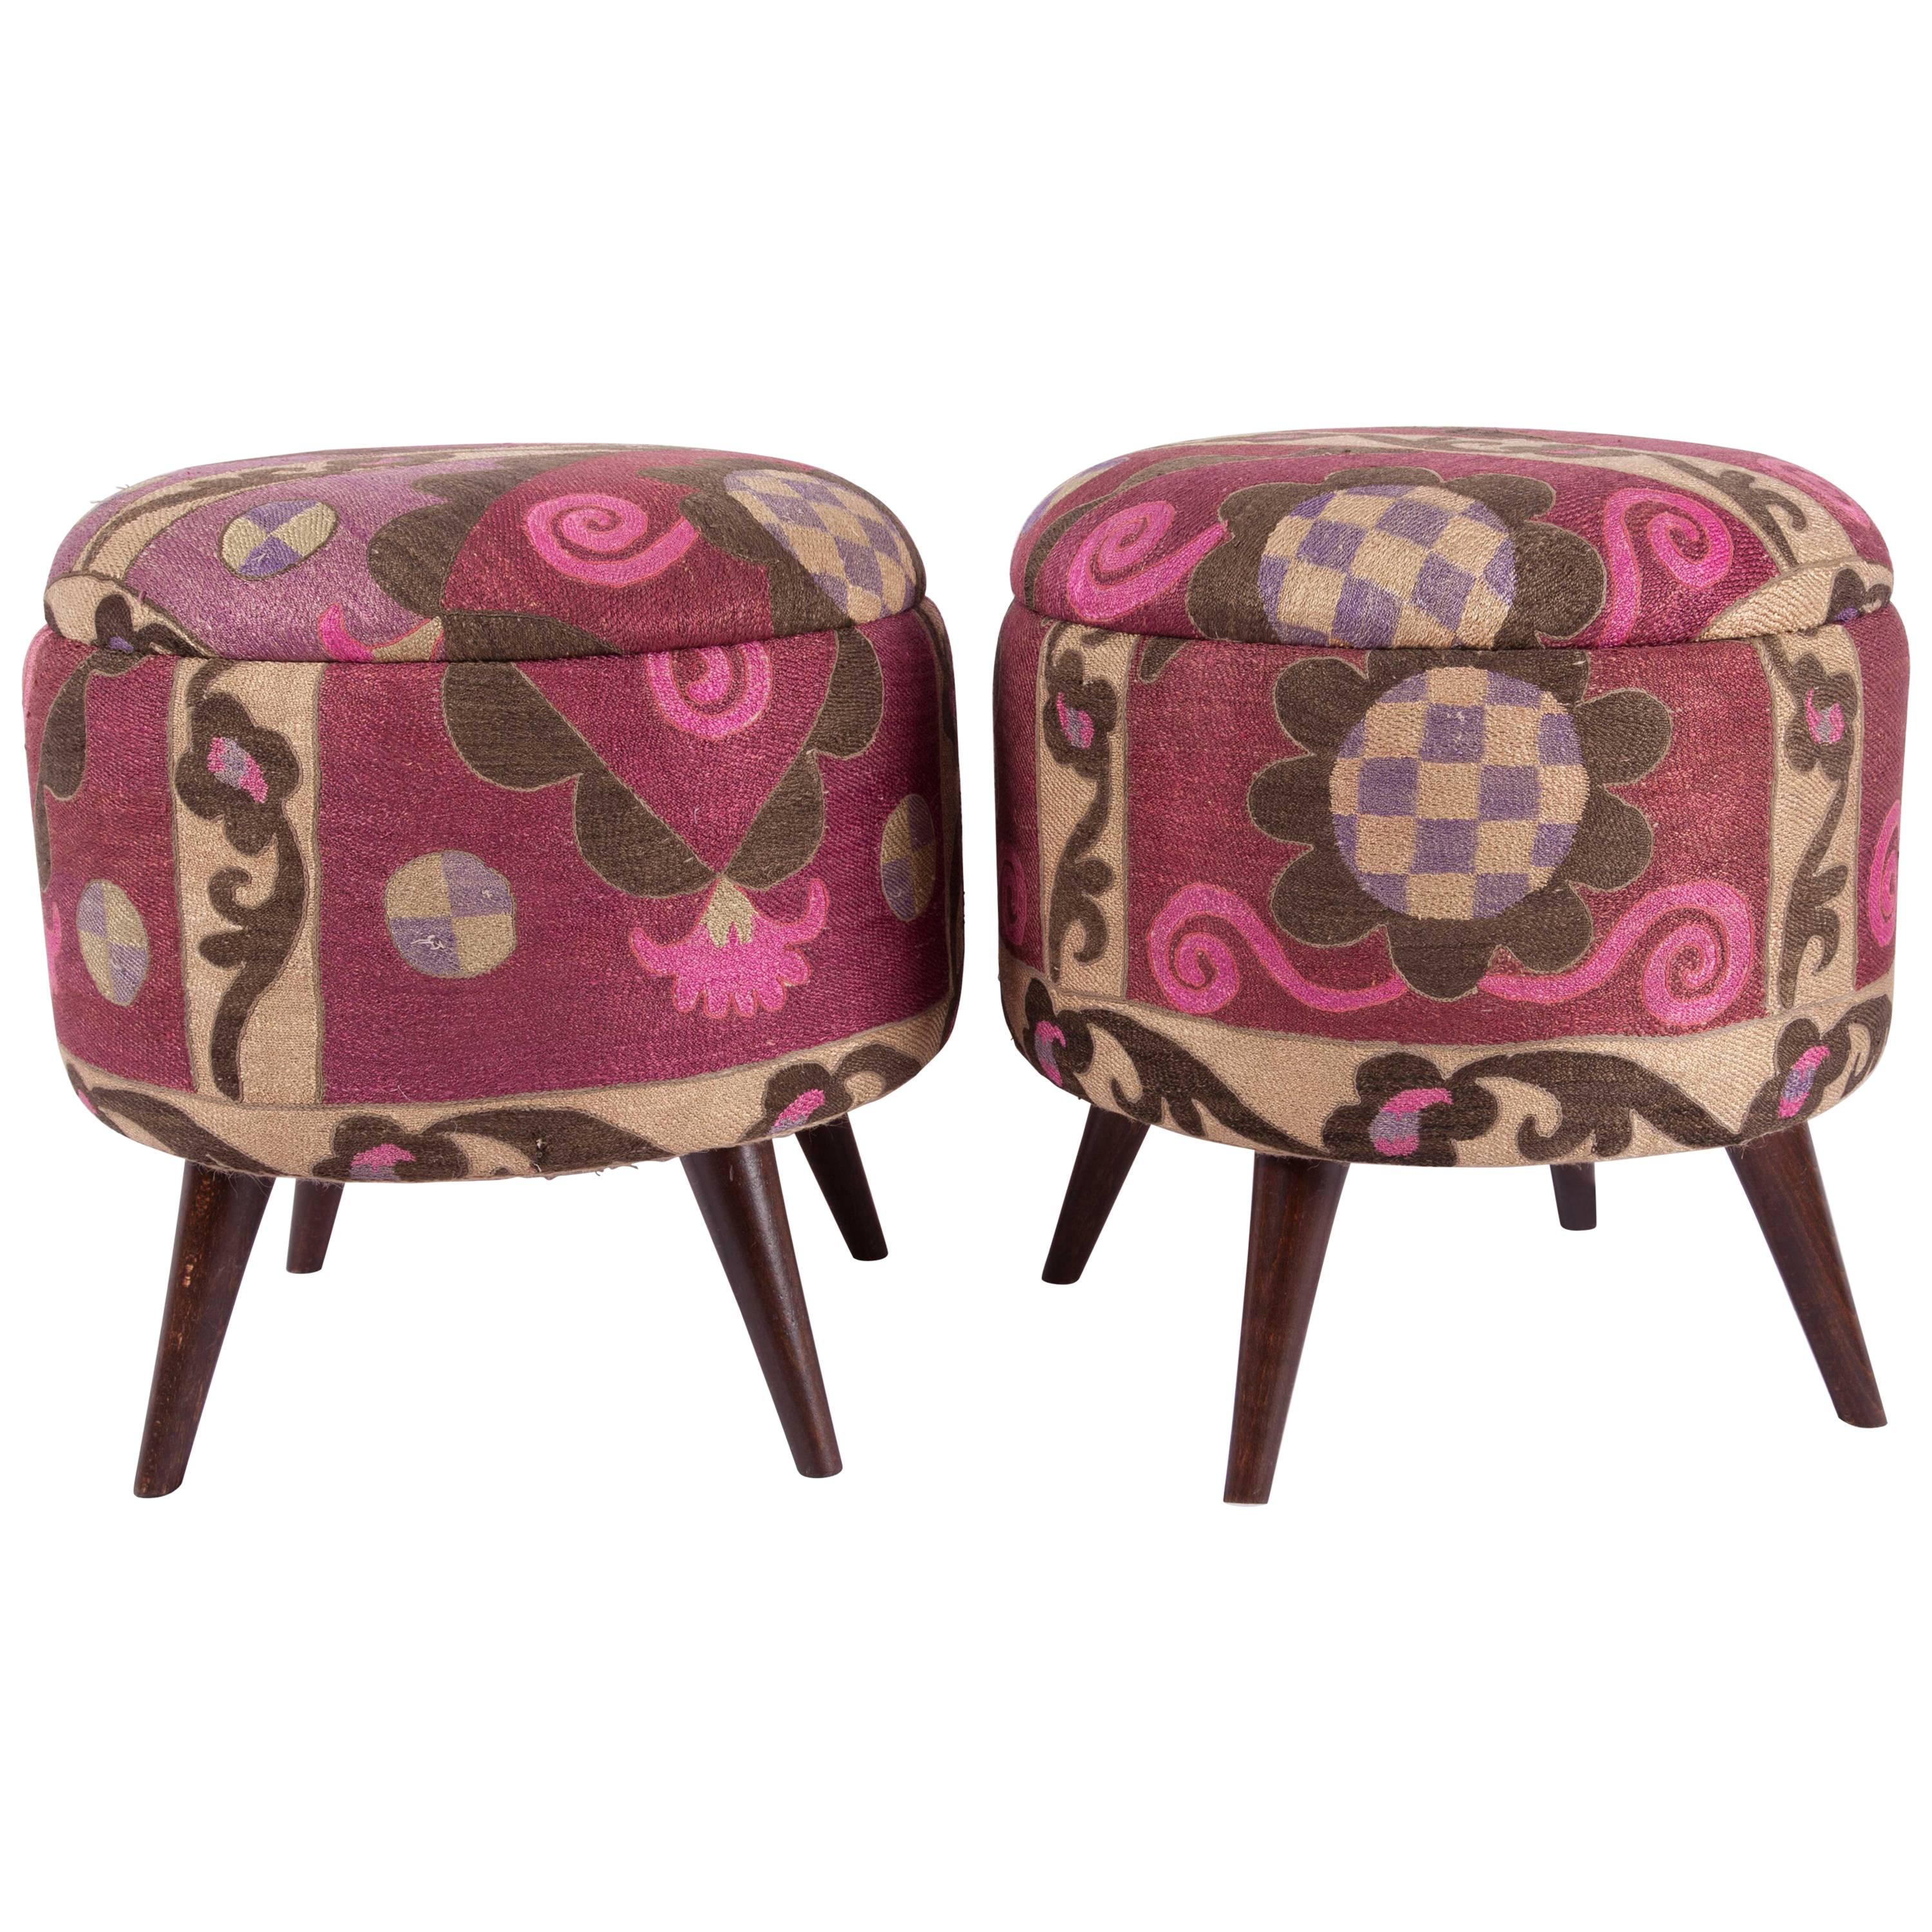 Ottoman or Poufs Fashioned from a Mid-20th Century Tashkent Silk Suzani